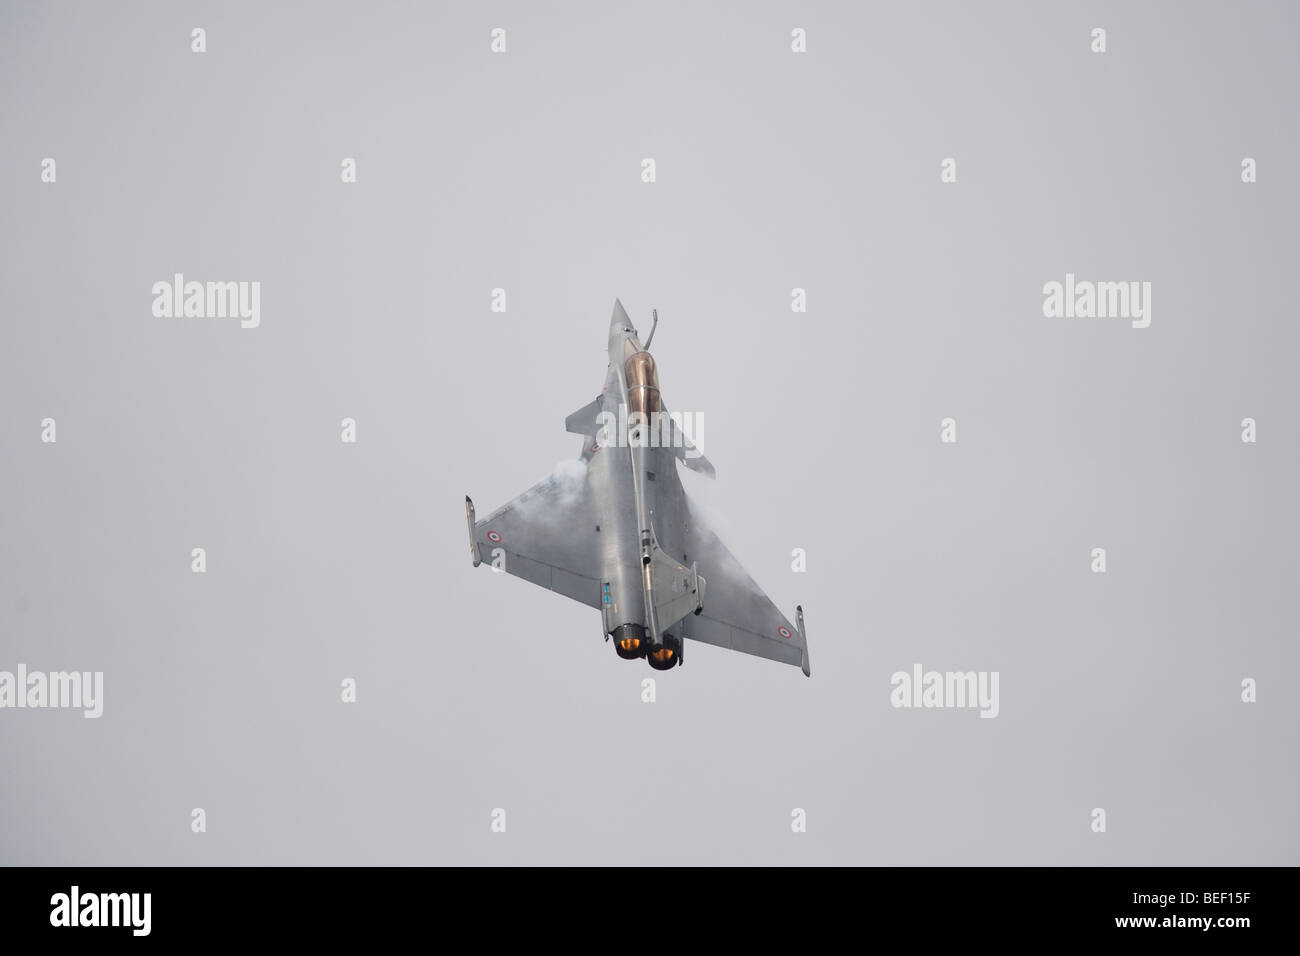 Dassault Rafale French Air Force fighter aircraft Stock Photo